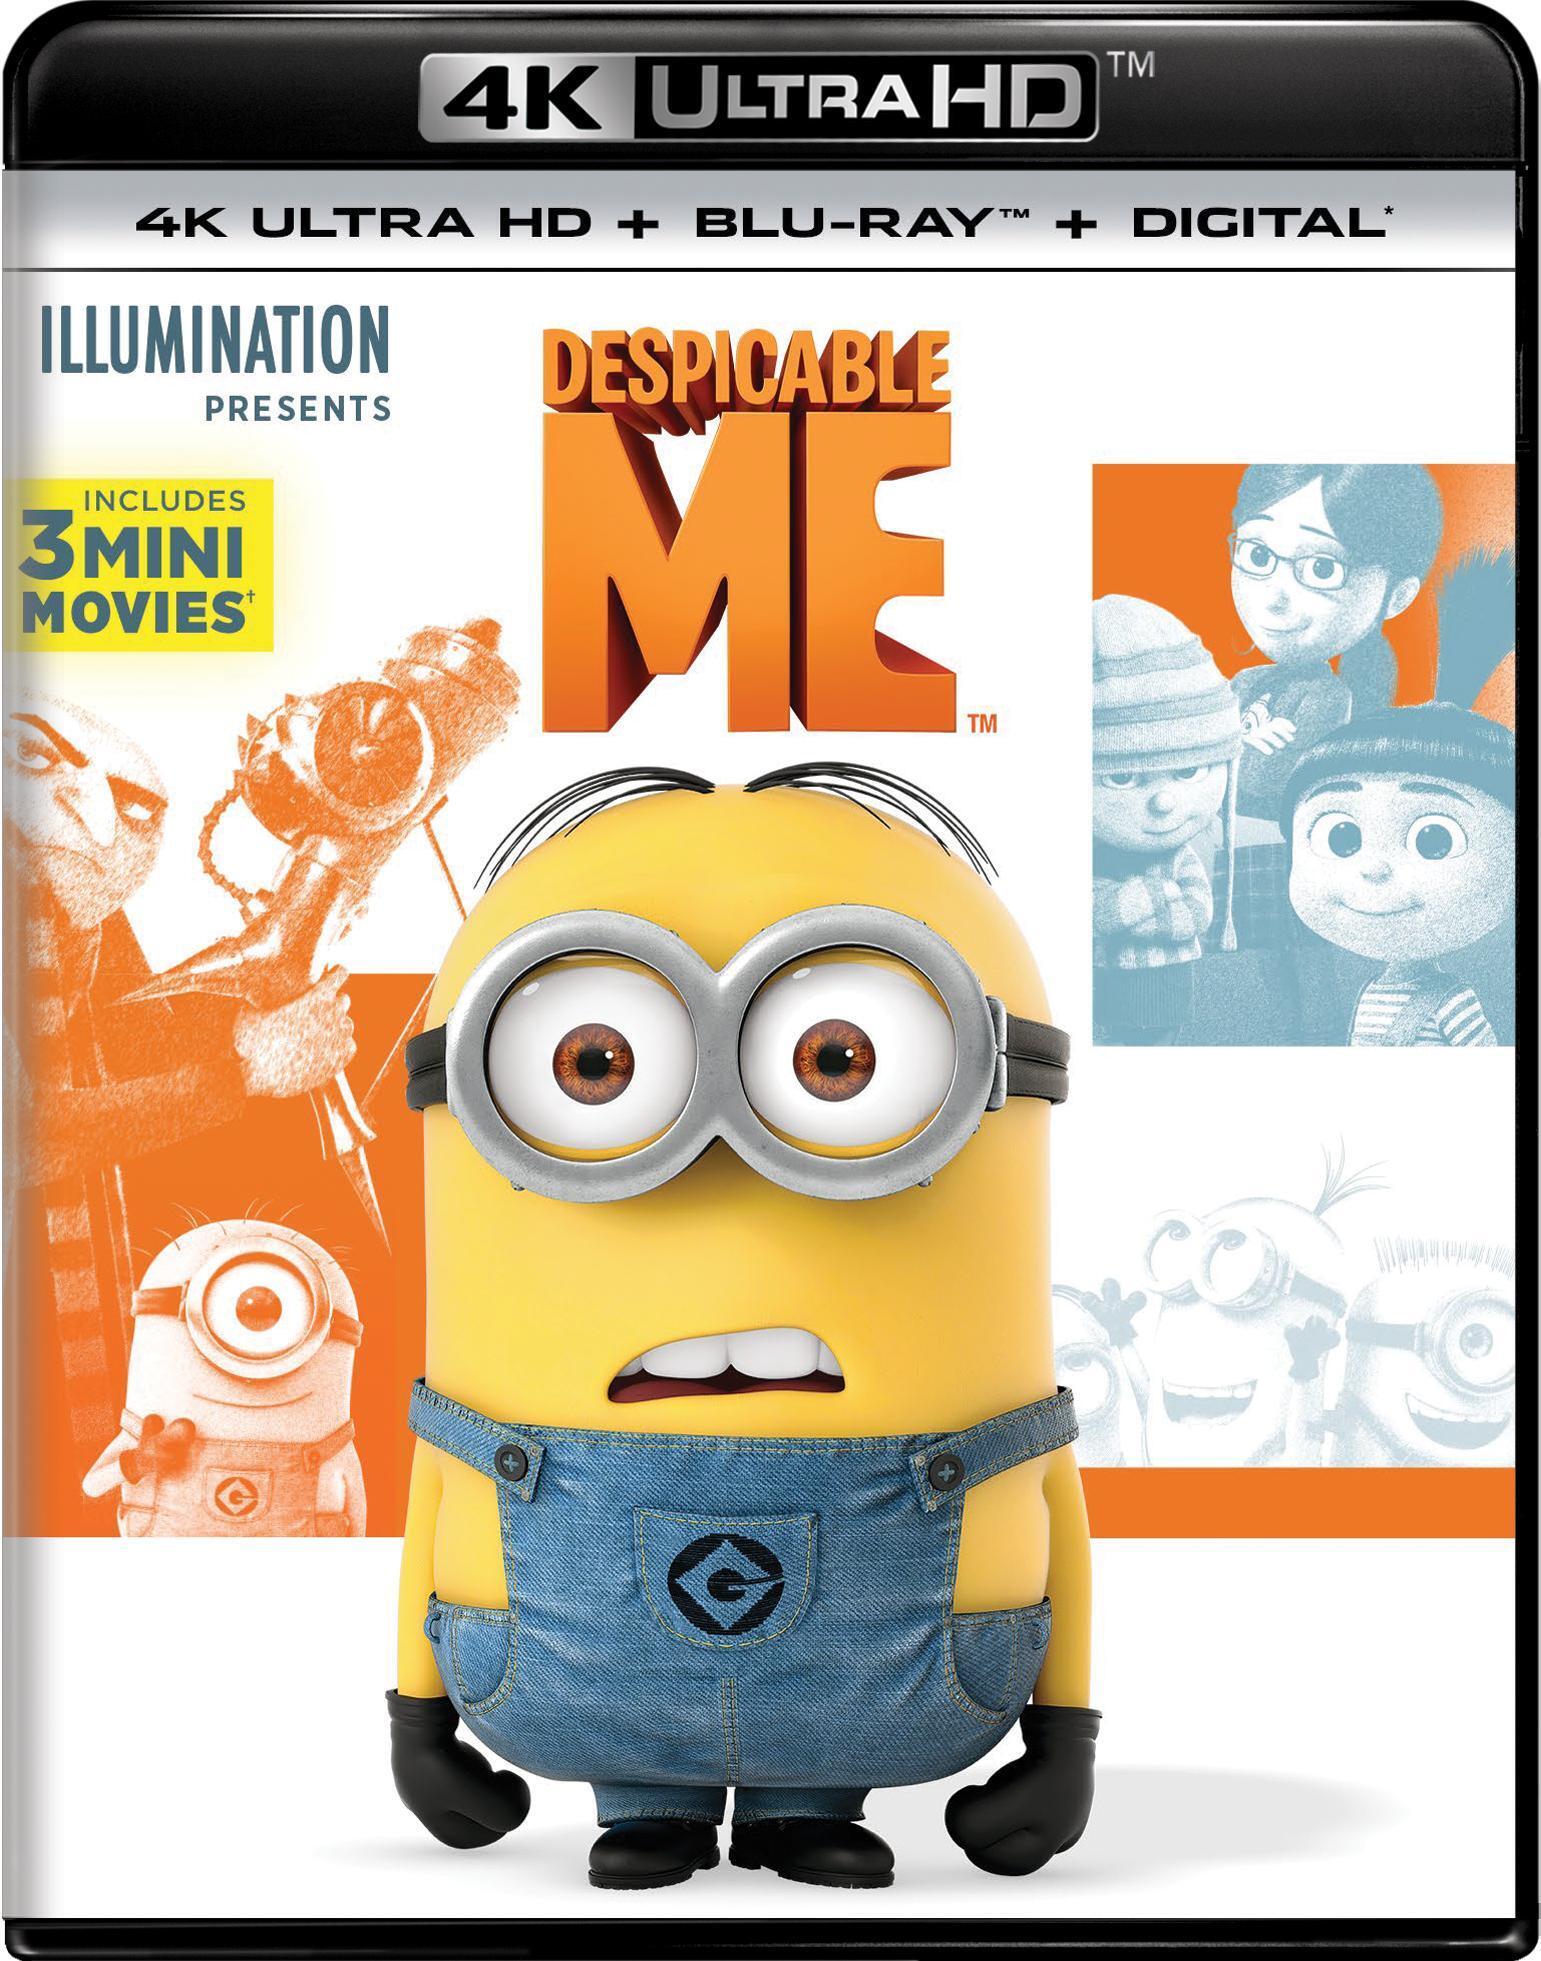 Despicable Me (4K Ultra HD) - UHD [ 2010 ]  - Animation Movies On 4K Ultra HD Blu-ray - Movies On GRUV